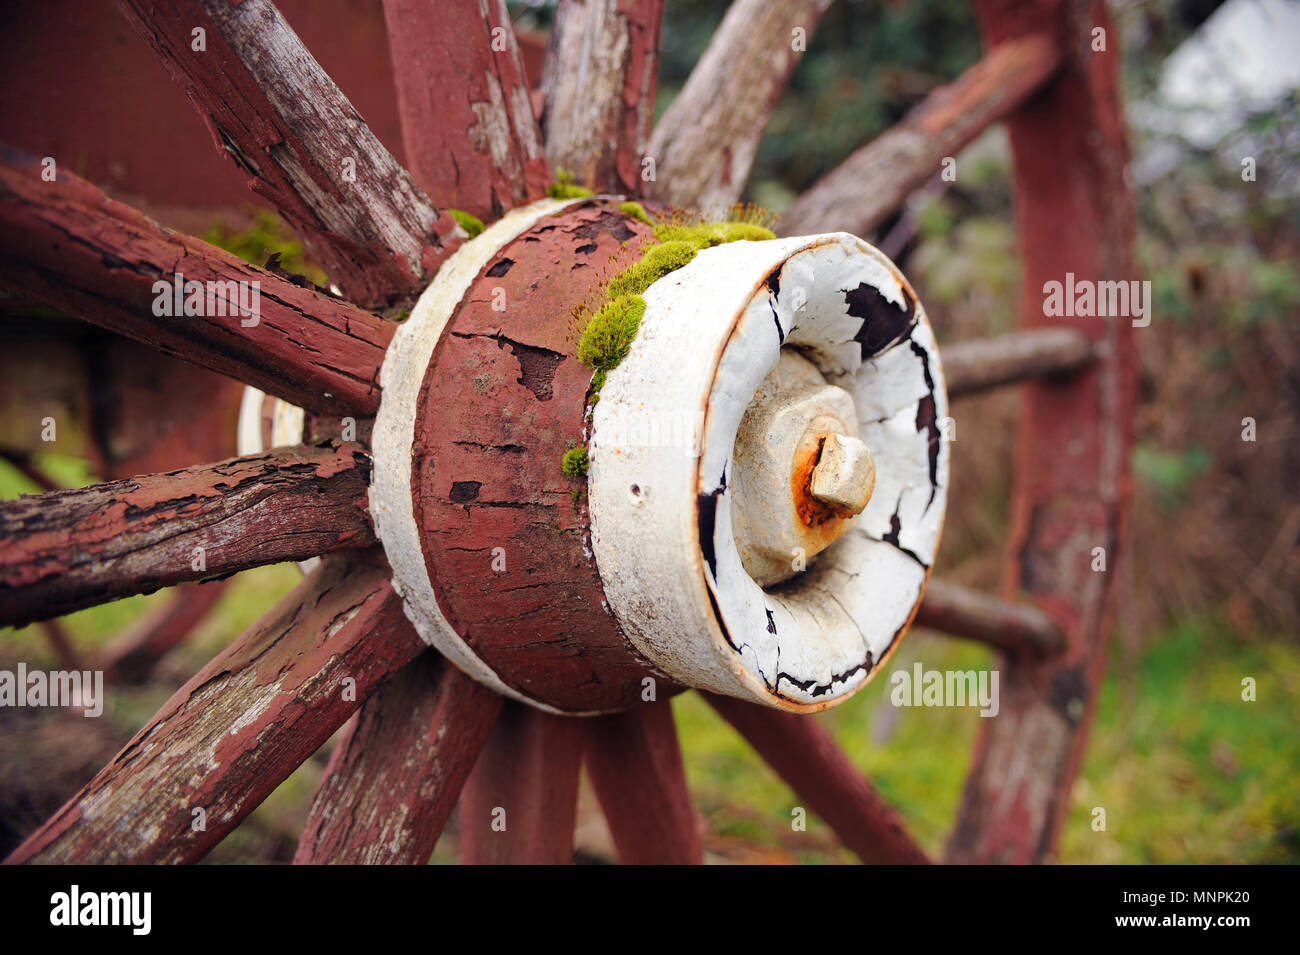 An aging wooden wheel. Stock Photo